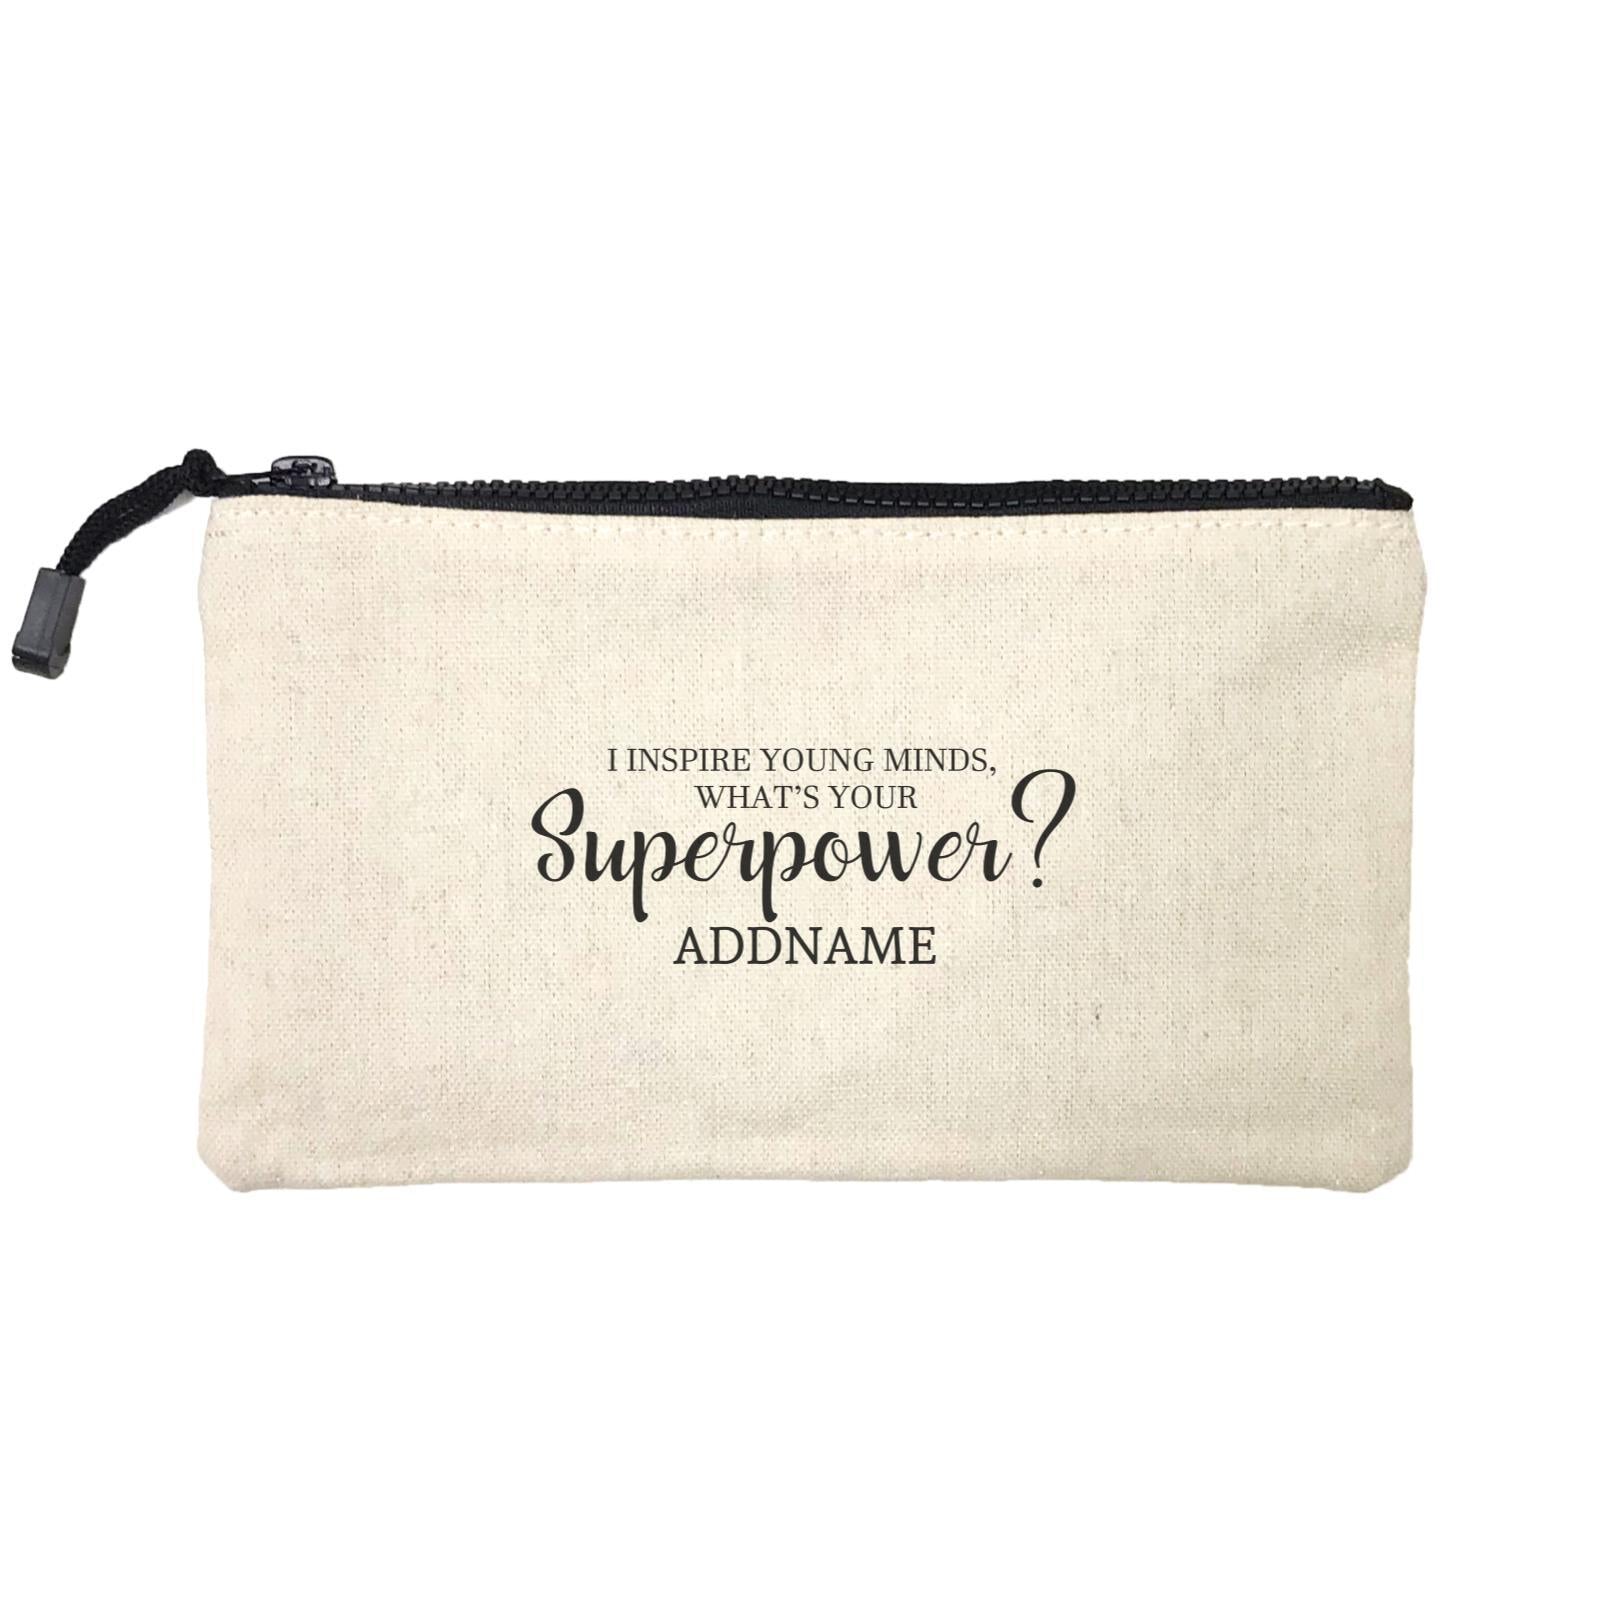 Super Teachers I Inspire Young Minds What's Your Superpower Addname Mini Accessories Stationery Pouch